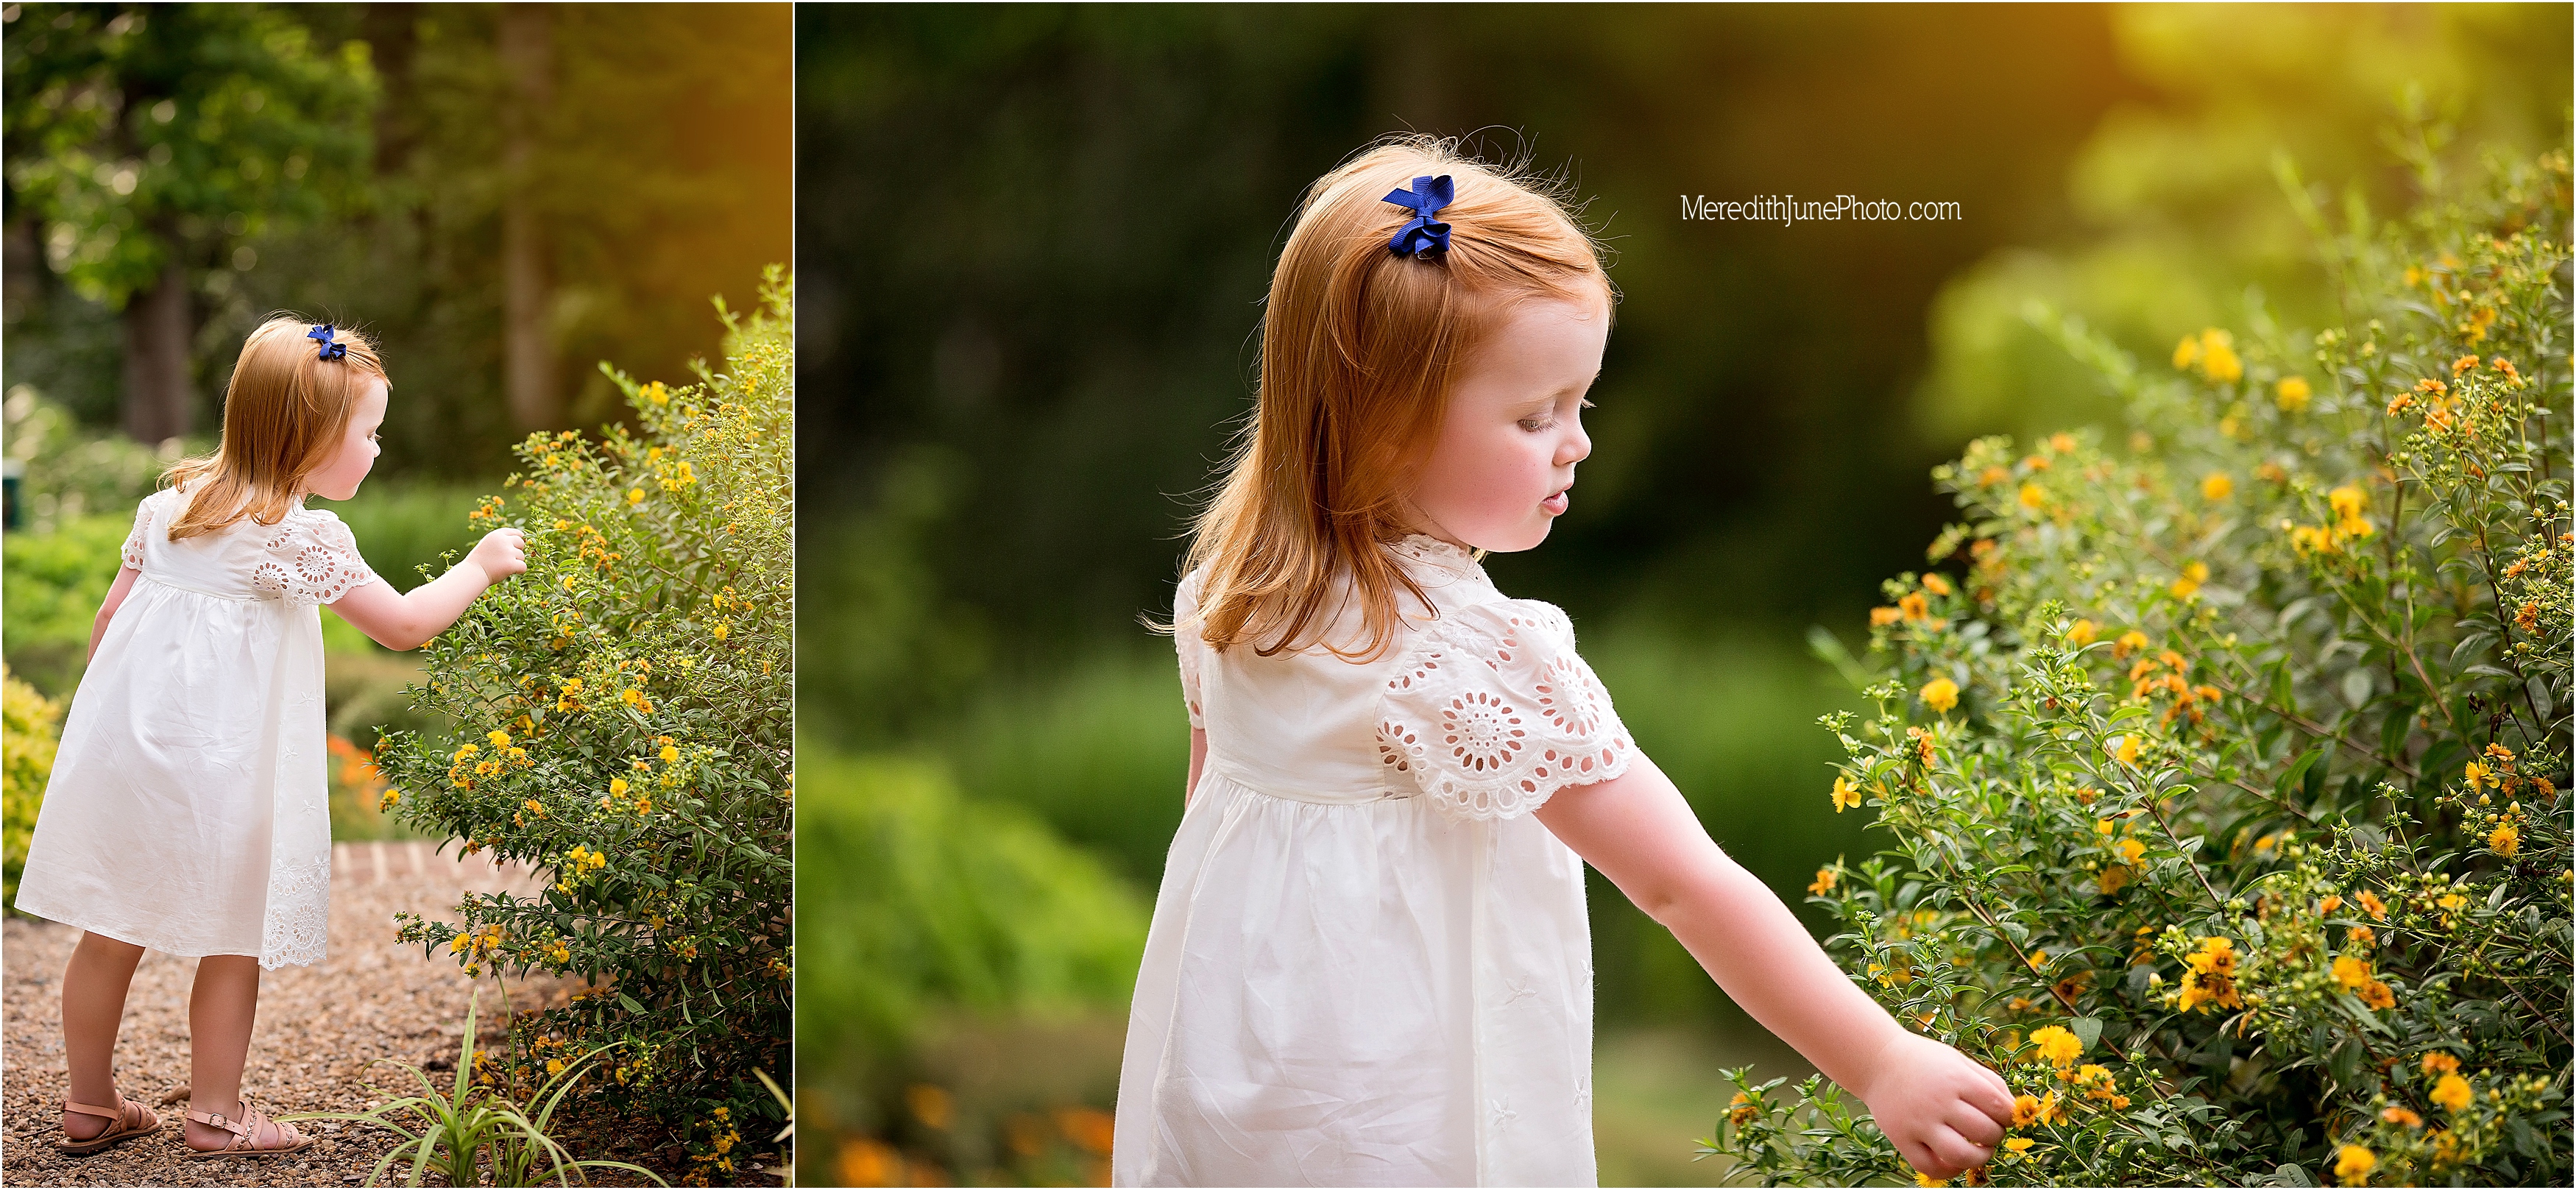 Older sibling shots during 1 year session